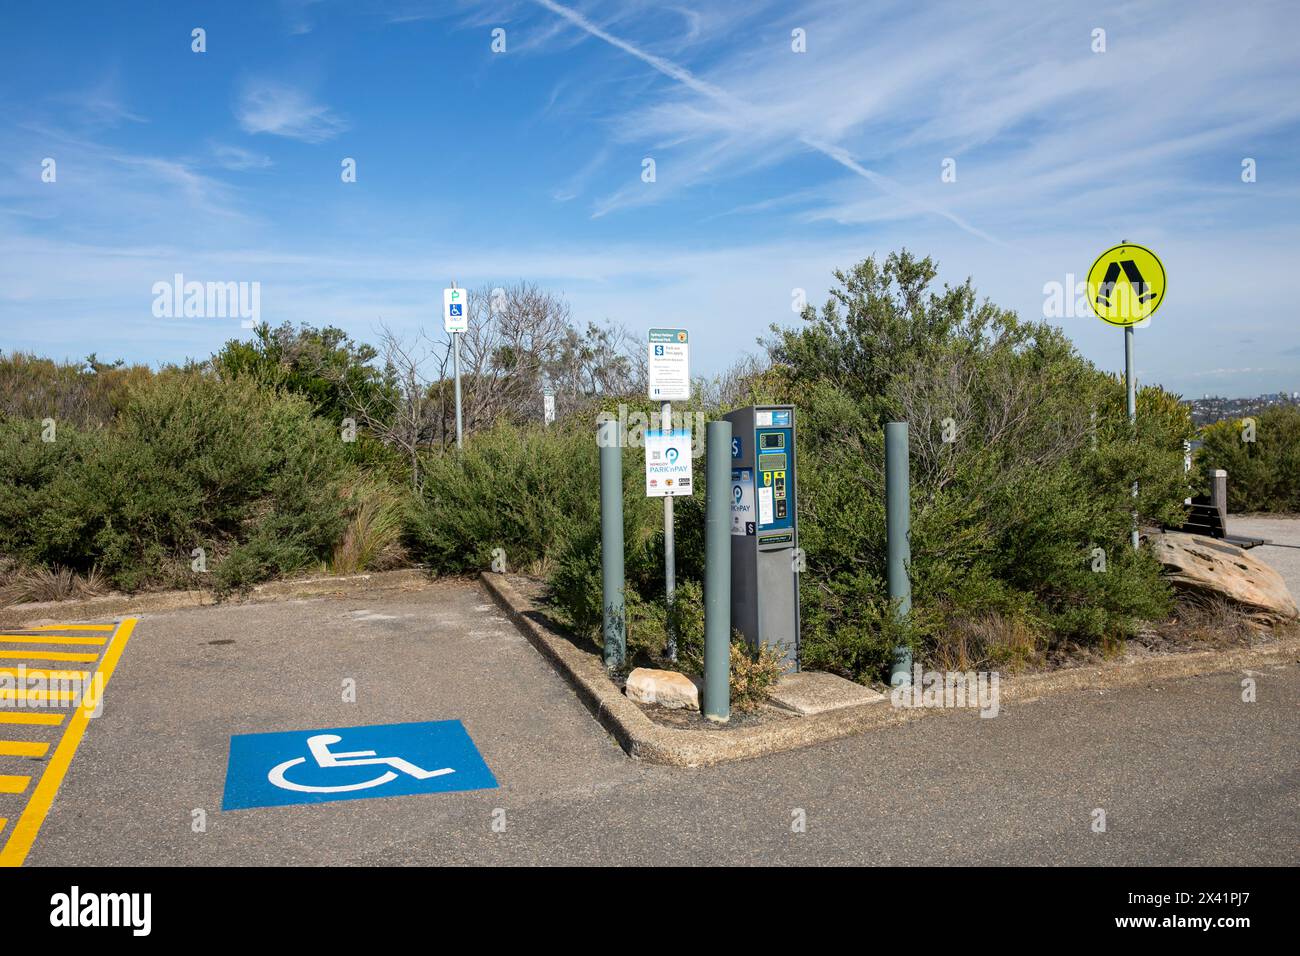 Parking bay for disabled drivers to use and adjacent parking ticket machine, North Head,Sydney,NSW,Australia Stock Photo